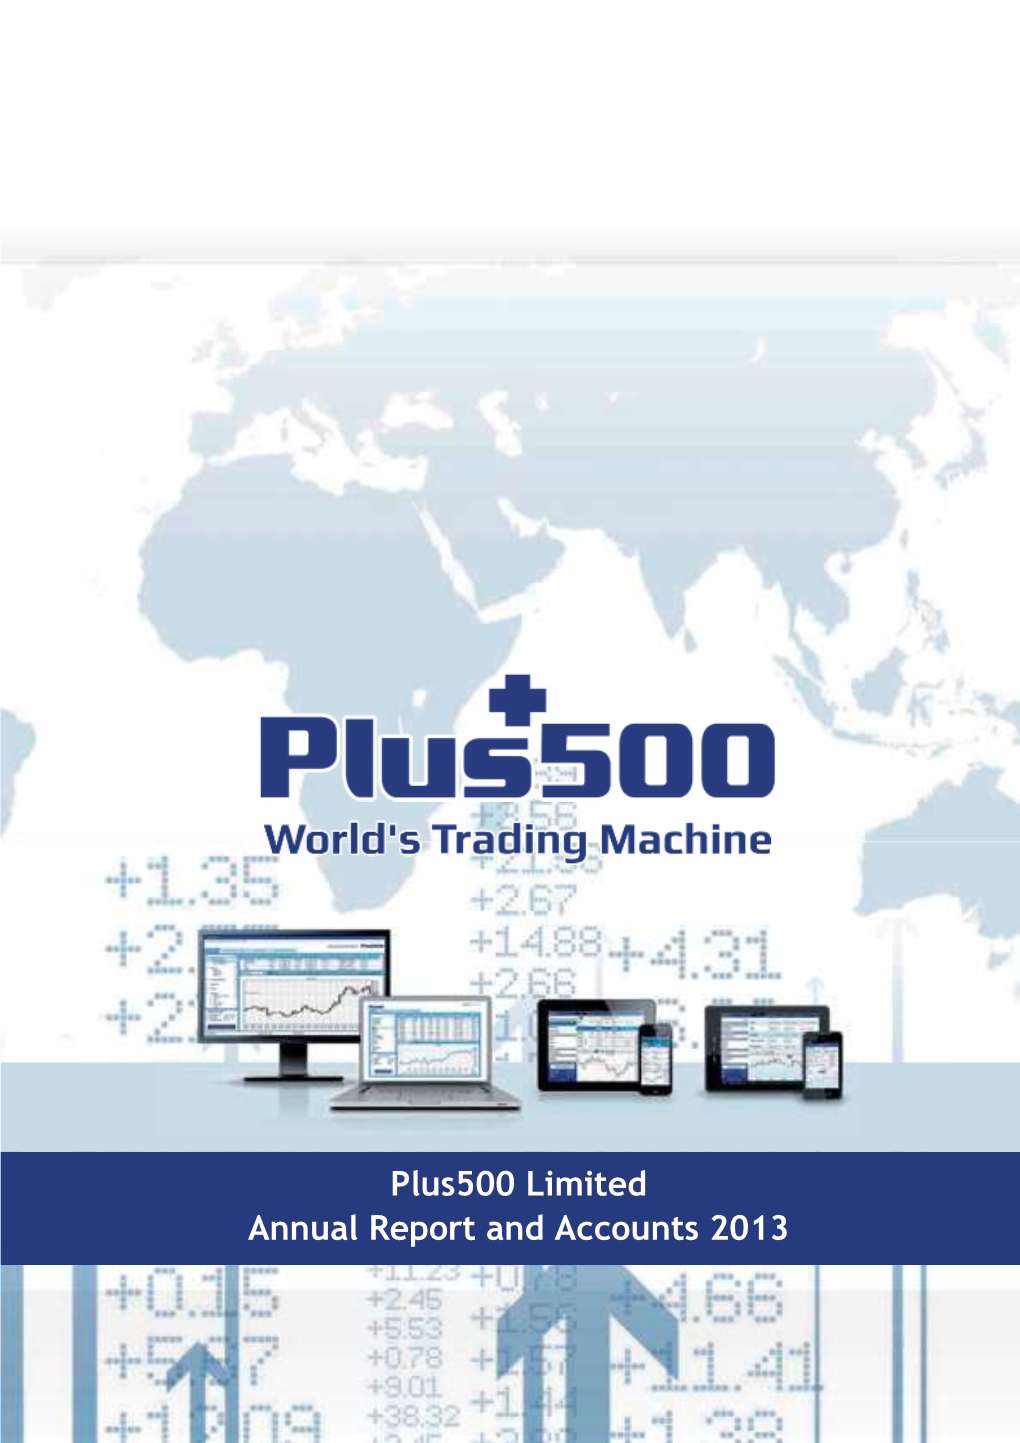 Plus500 Limited Annual Report and Accounts 2013 About Plus500